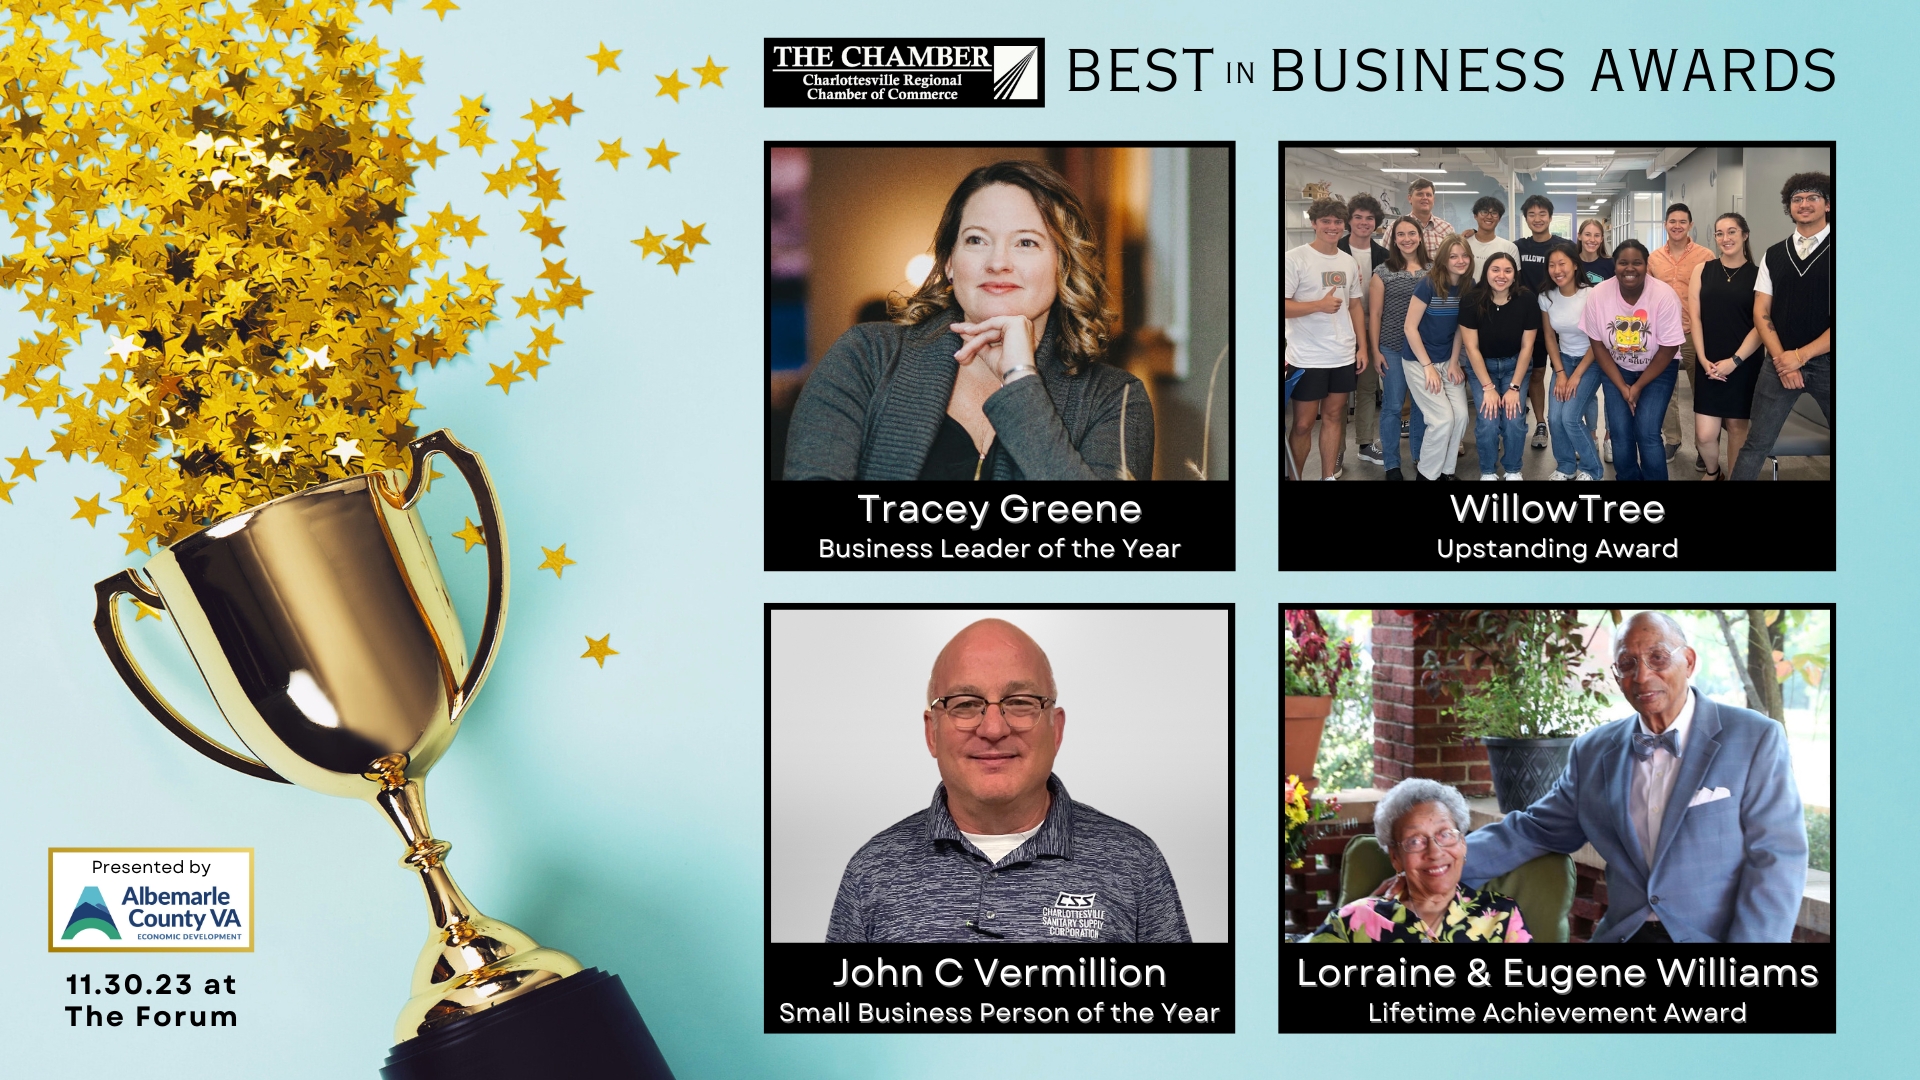 Best in Business Awards 2023